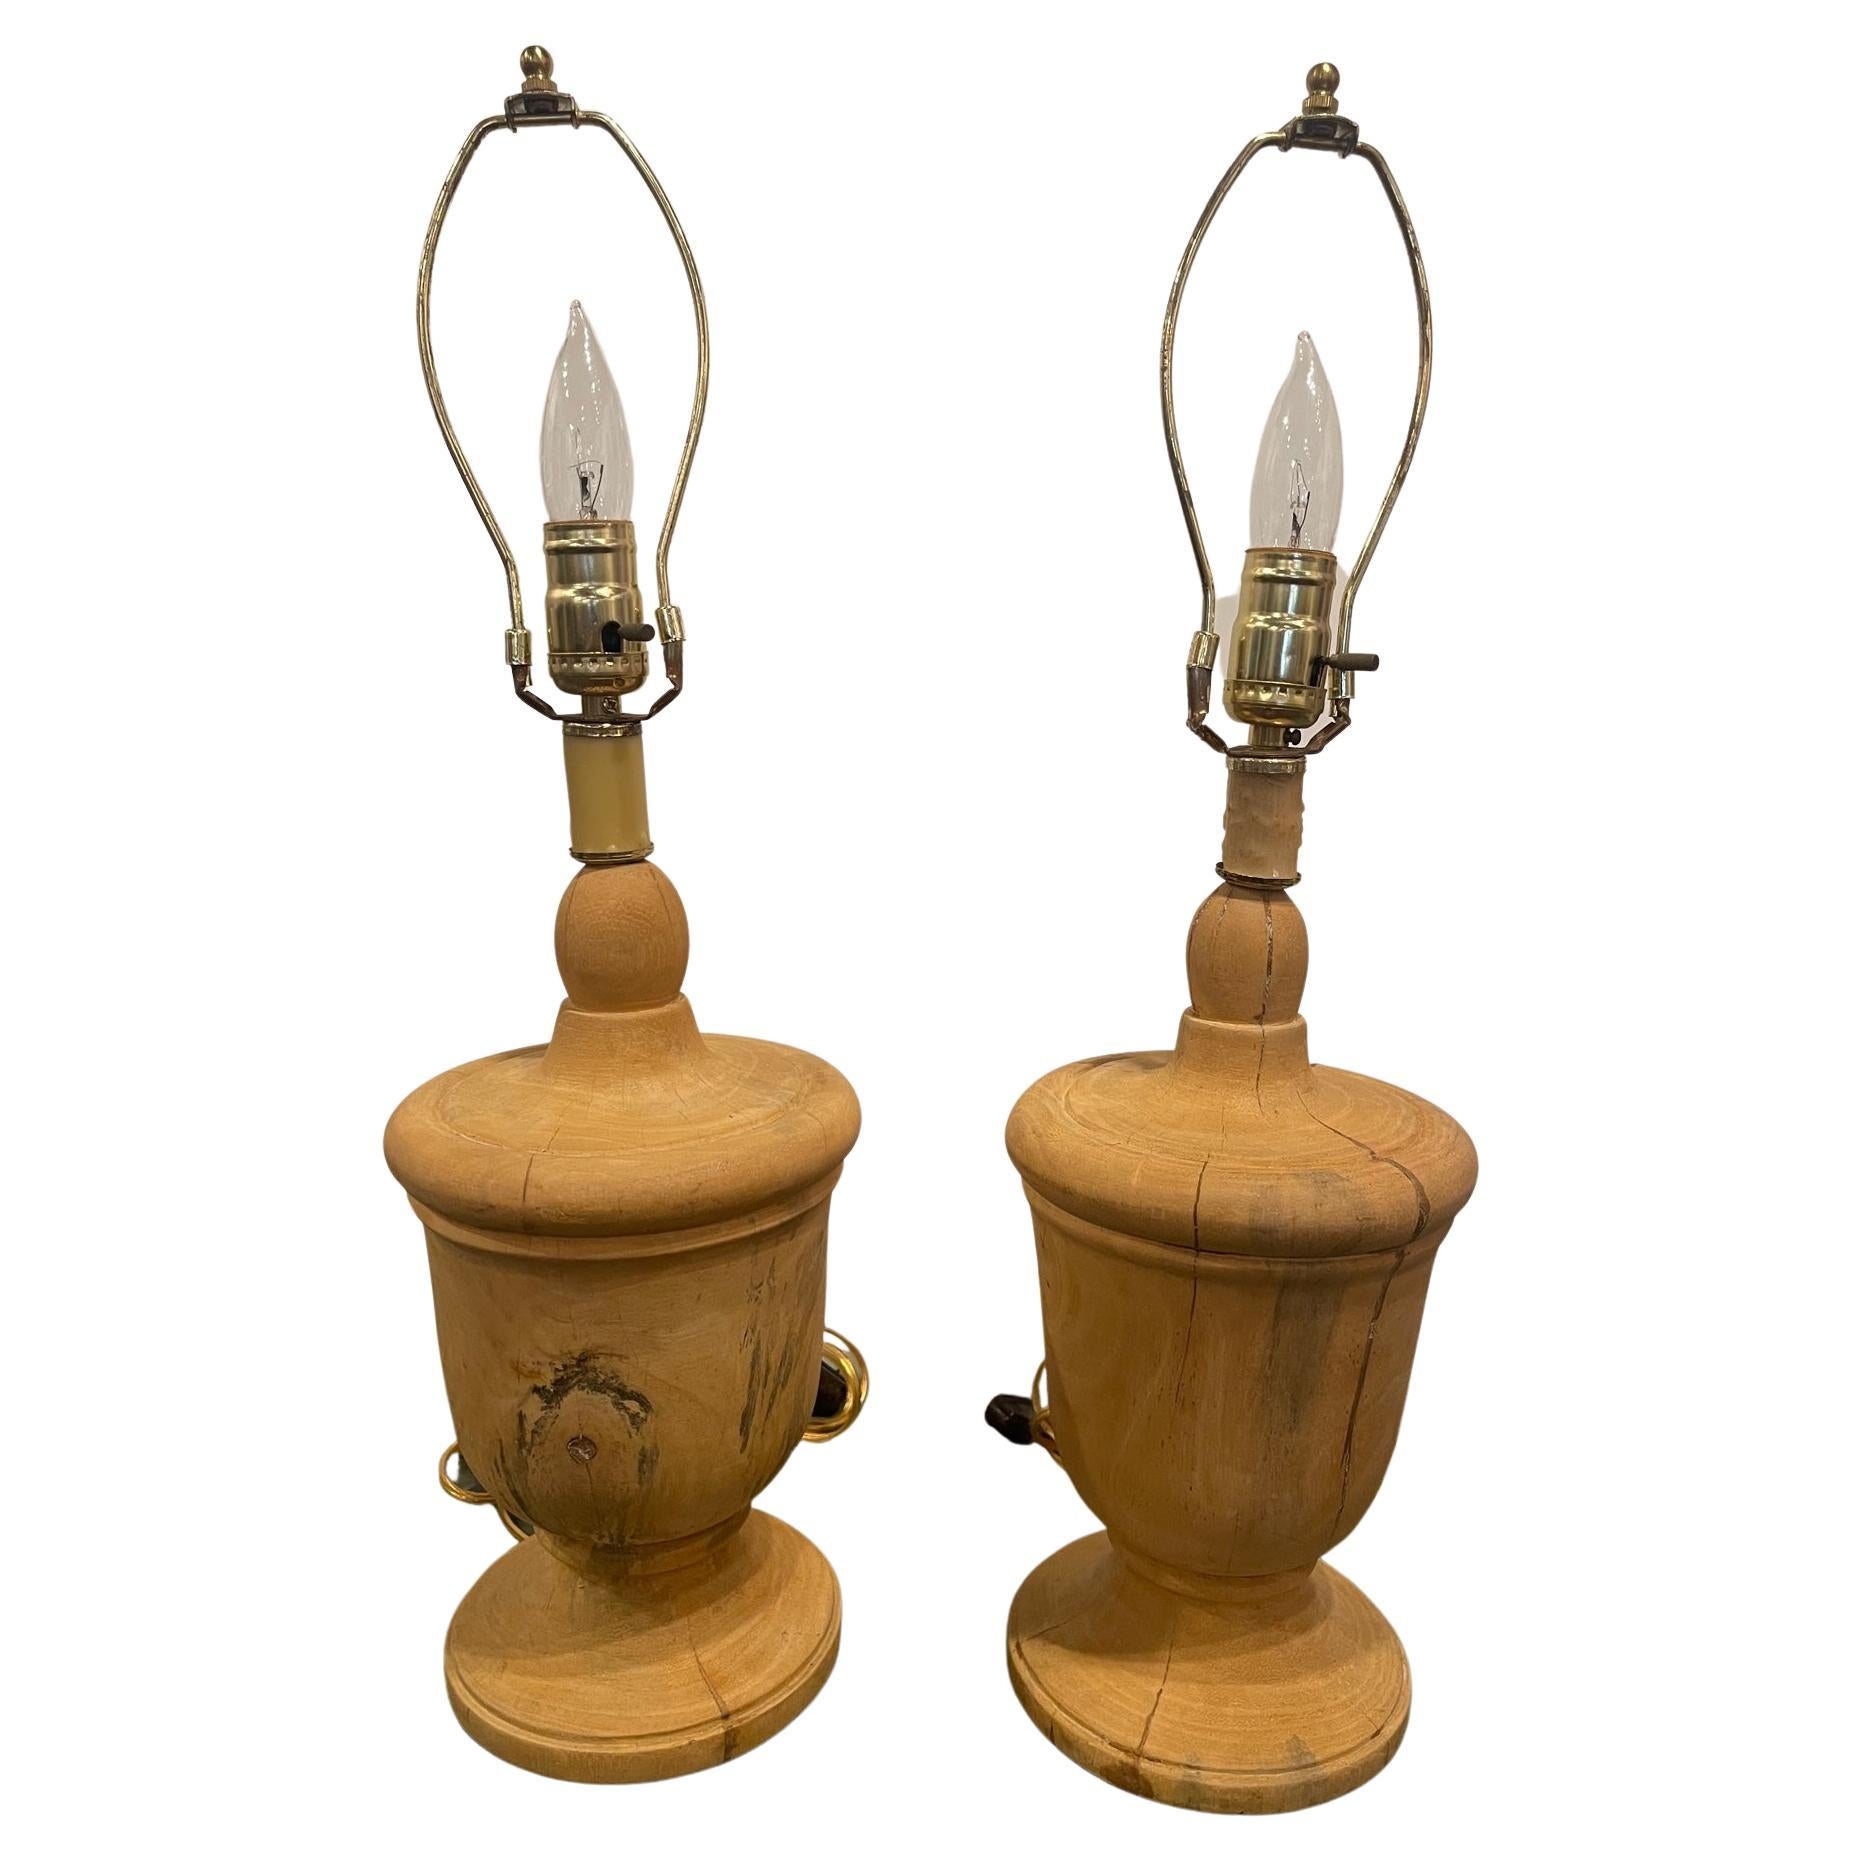 Pair of Capitol Fragments Adapted as Lamps, 19th Century